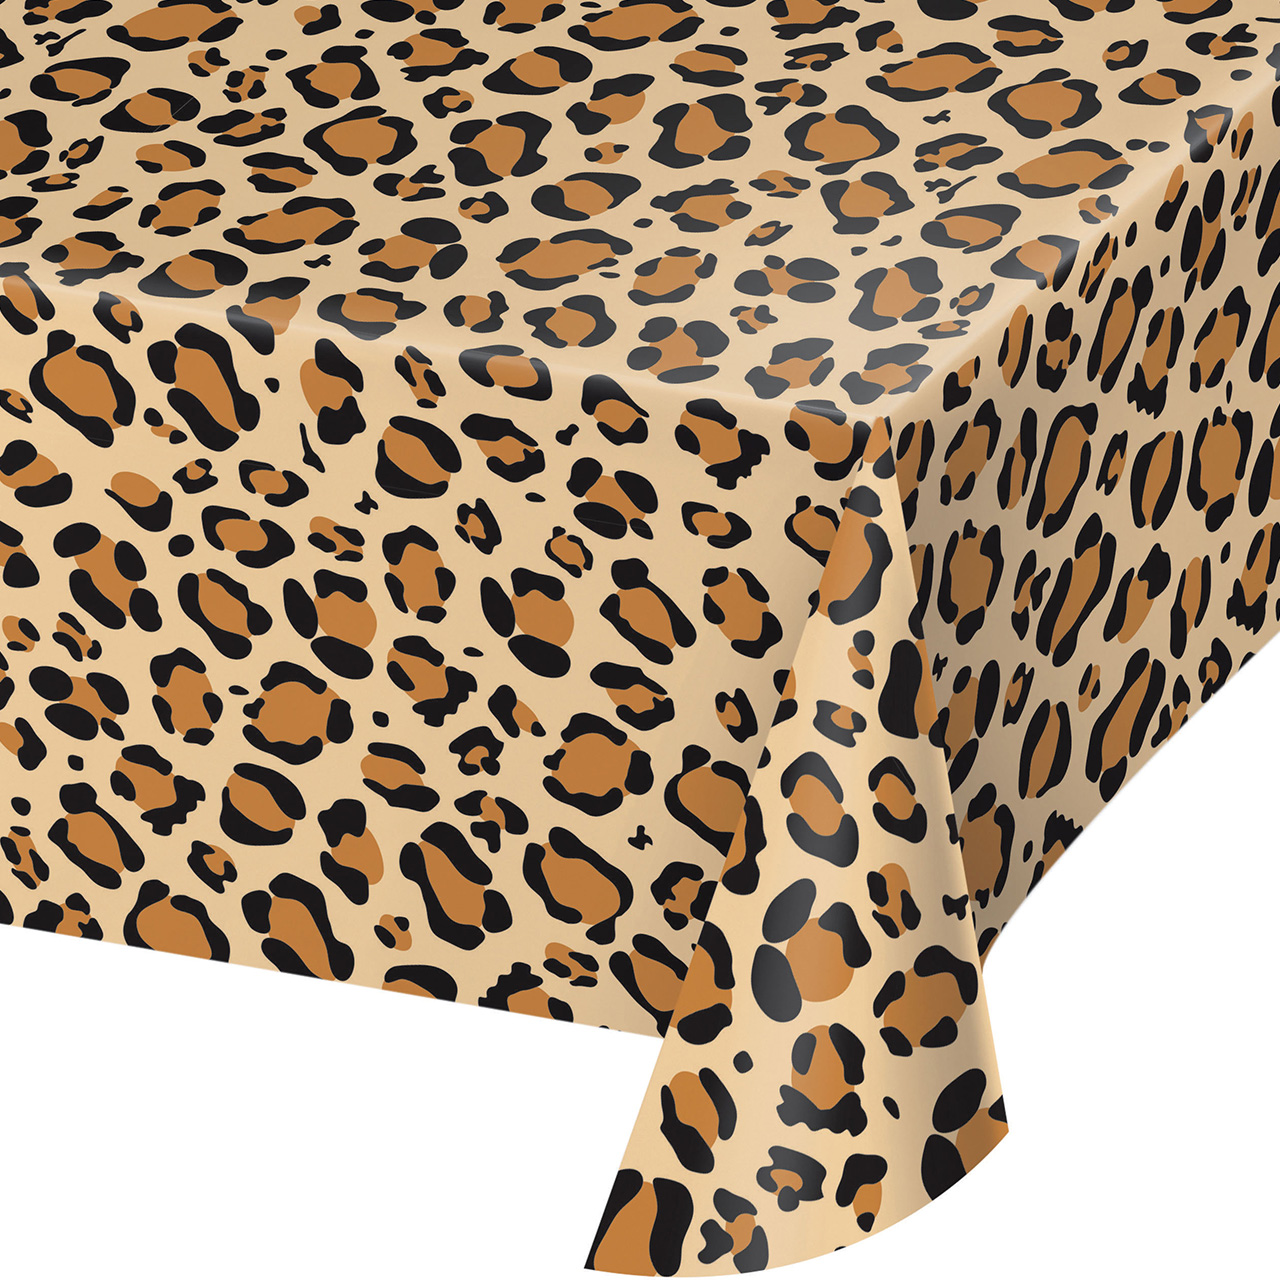 Tablecover - Leopard Print